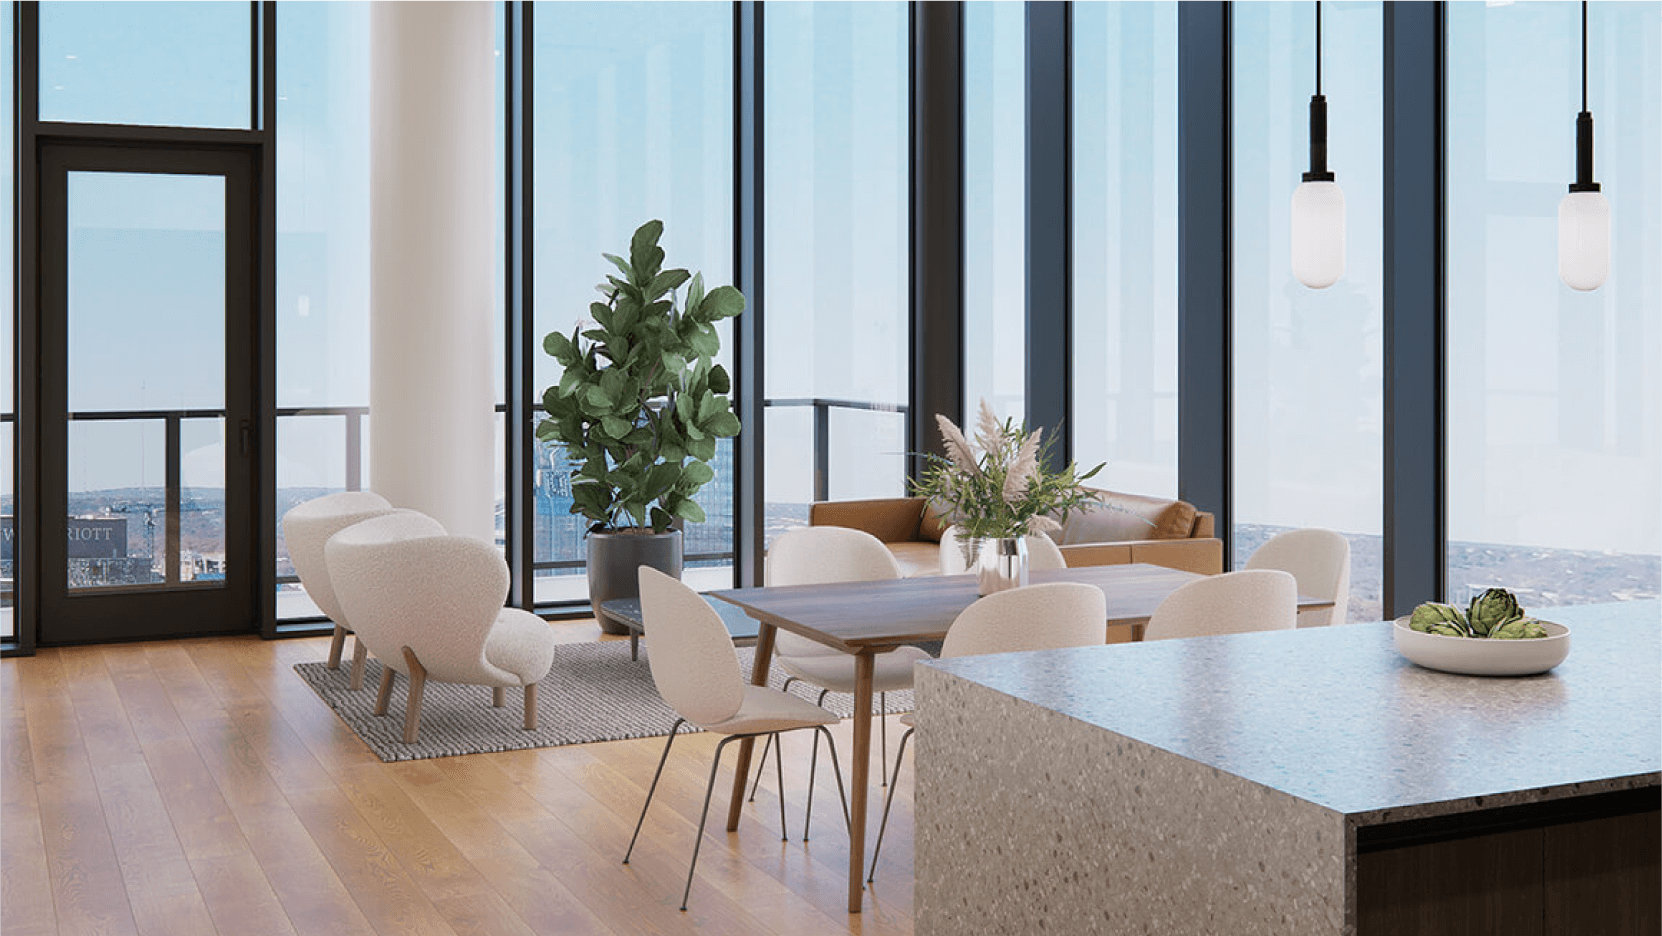 Spacious and sunlit living room at Vesper ATX in downtown Austin condo with floor-to-ceiling windows offering a panoramic city view, modern furniture with a minimalist design, and a cozy dining area with stylish pendant lighting.